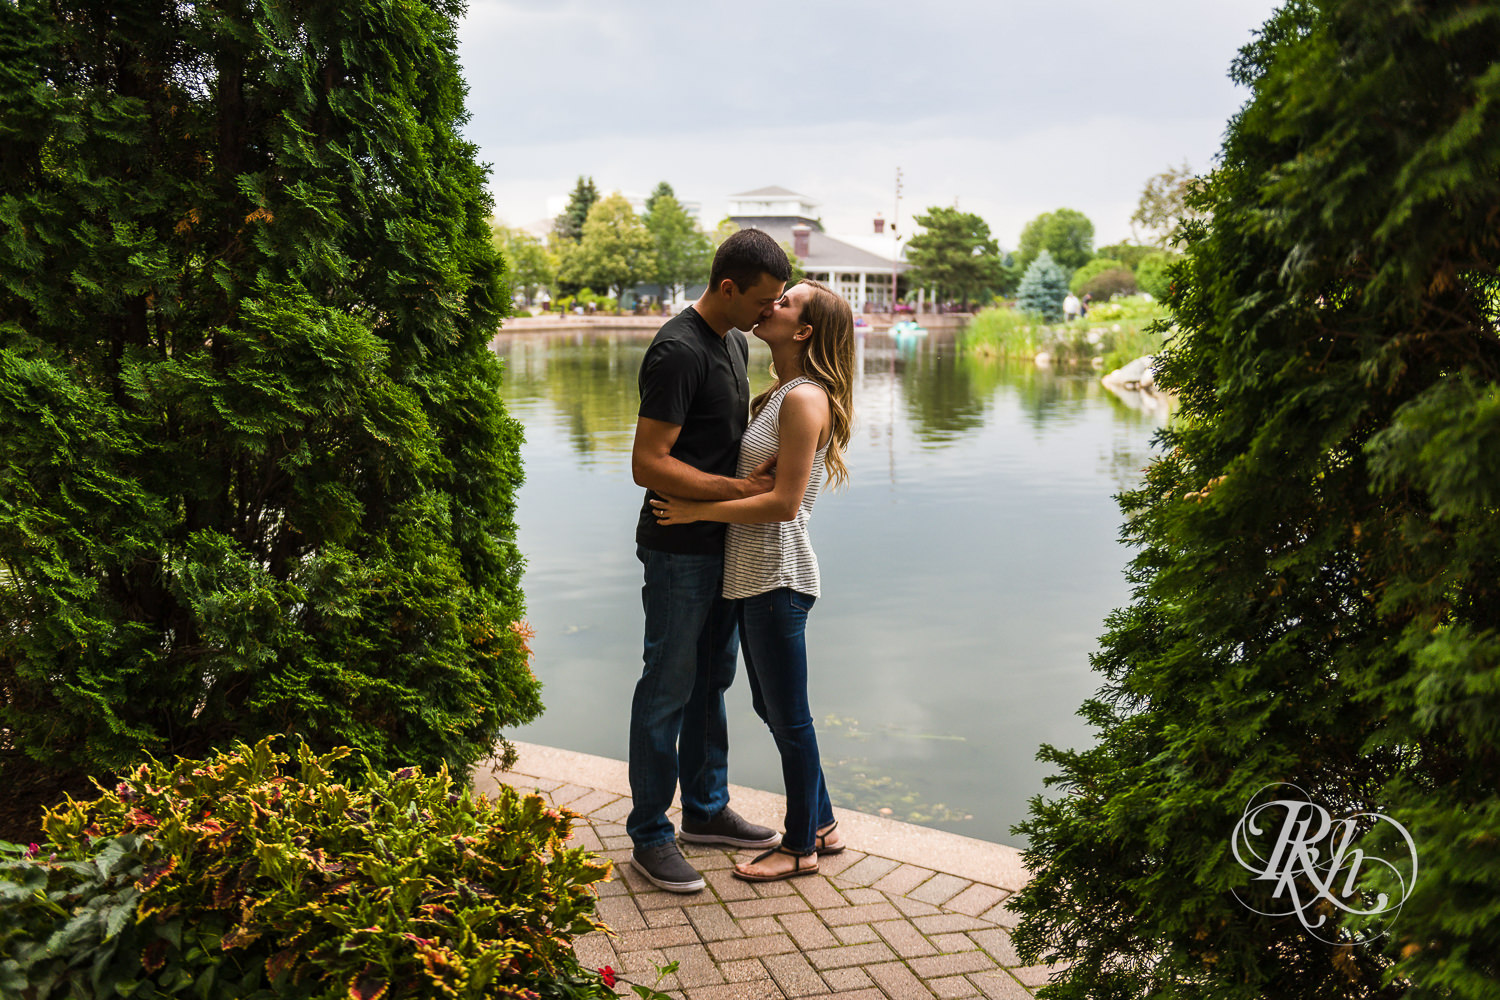 Man and woman in T-shirts and jeans kiss between trees in Centennial Lakes Park in Edina, Minnesota.